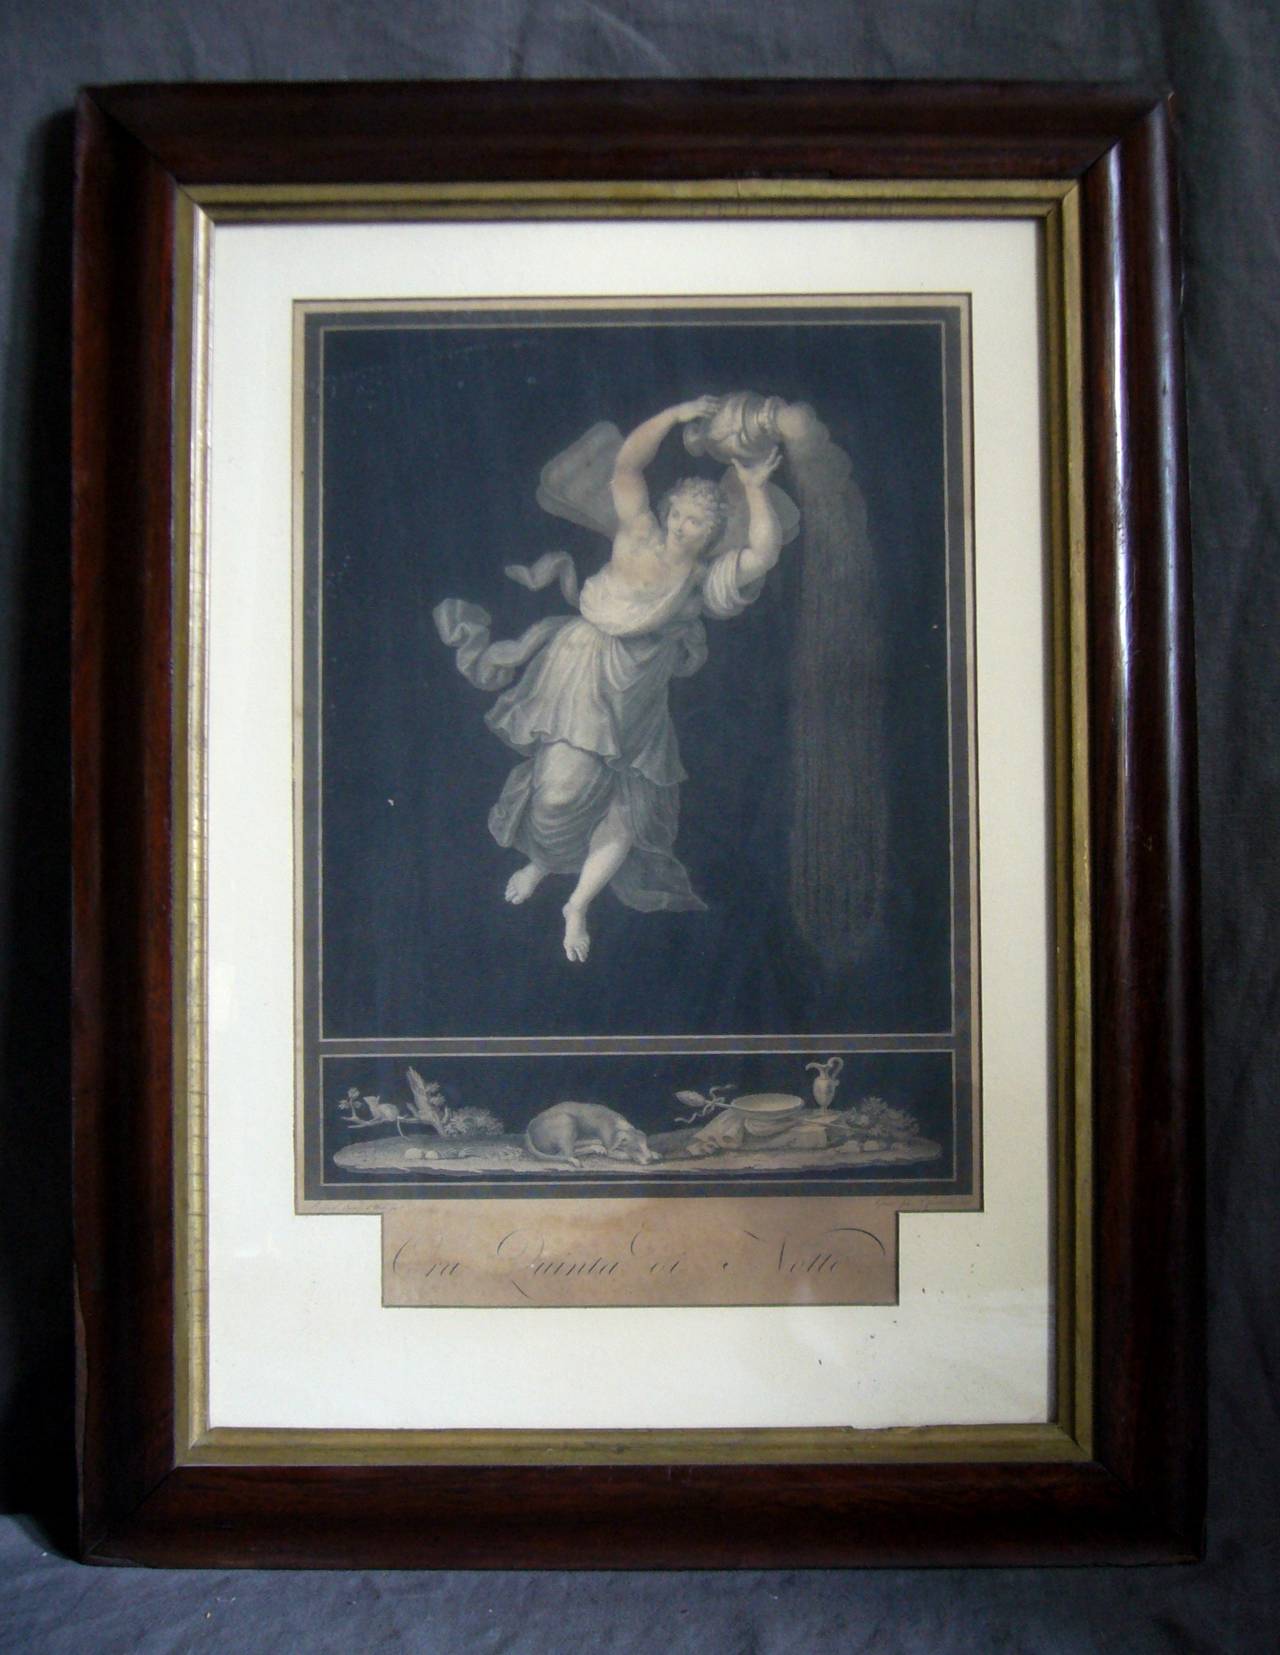 Pair of Italian Neoclassical allegorical engravings. Pair of Italian neoclassical allegorical engravings after Raphael from 